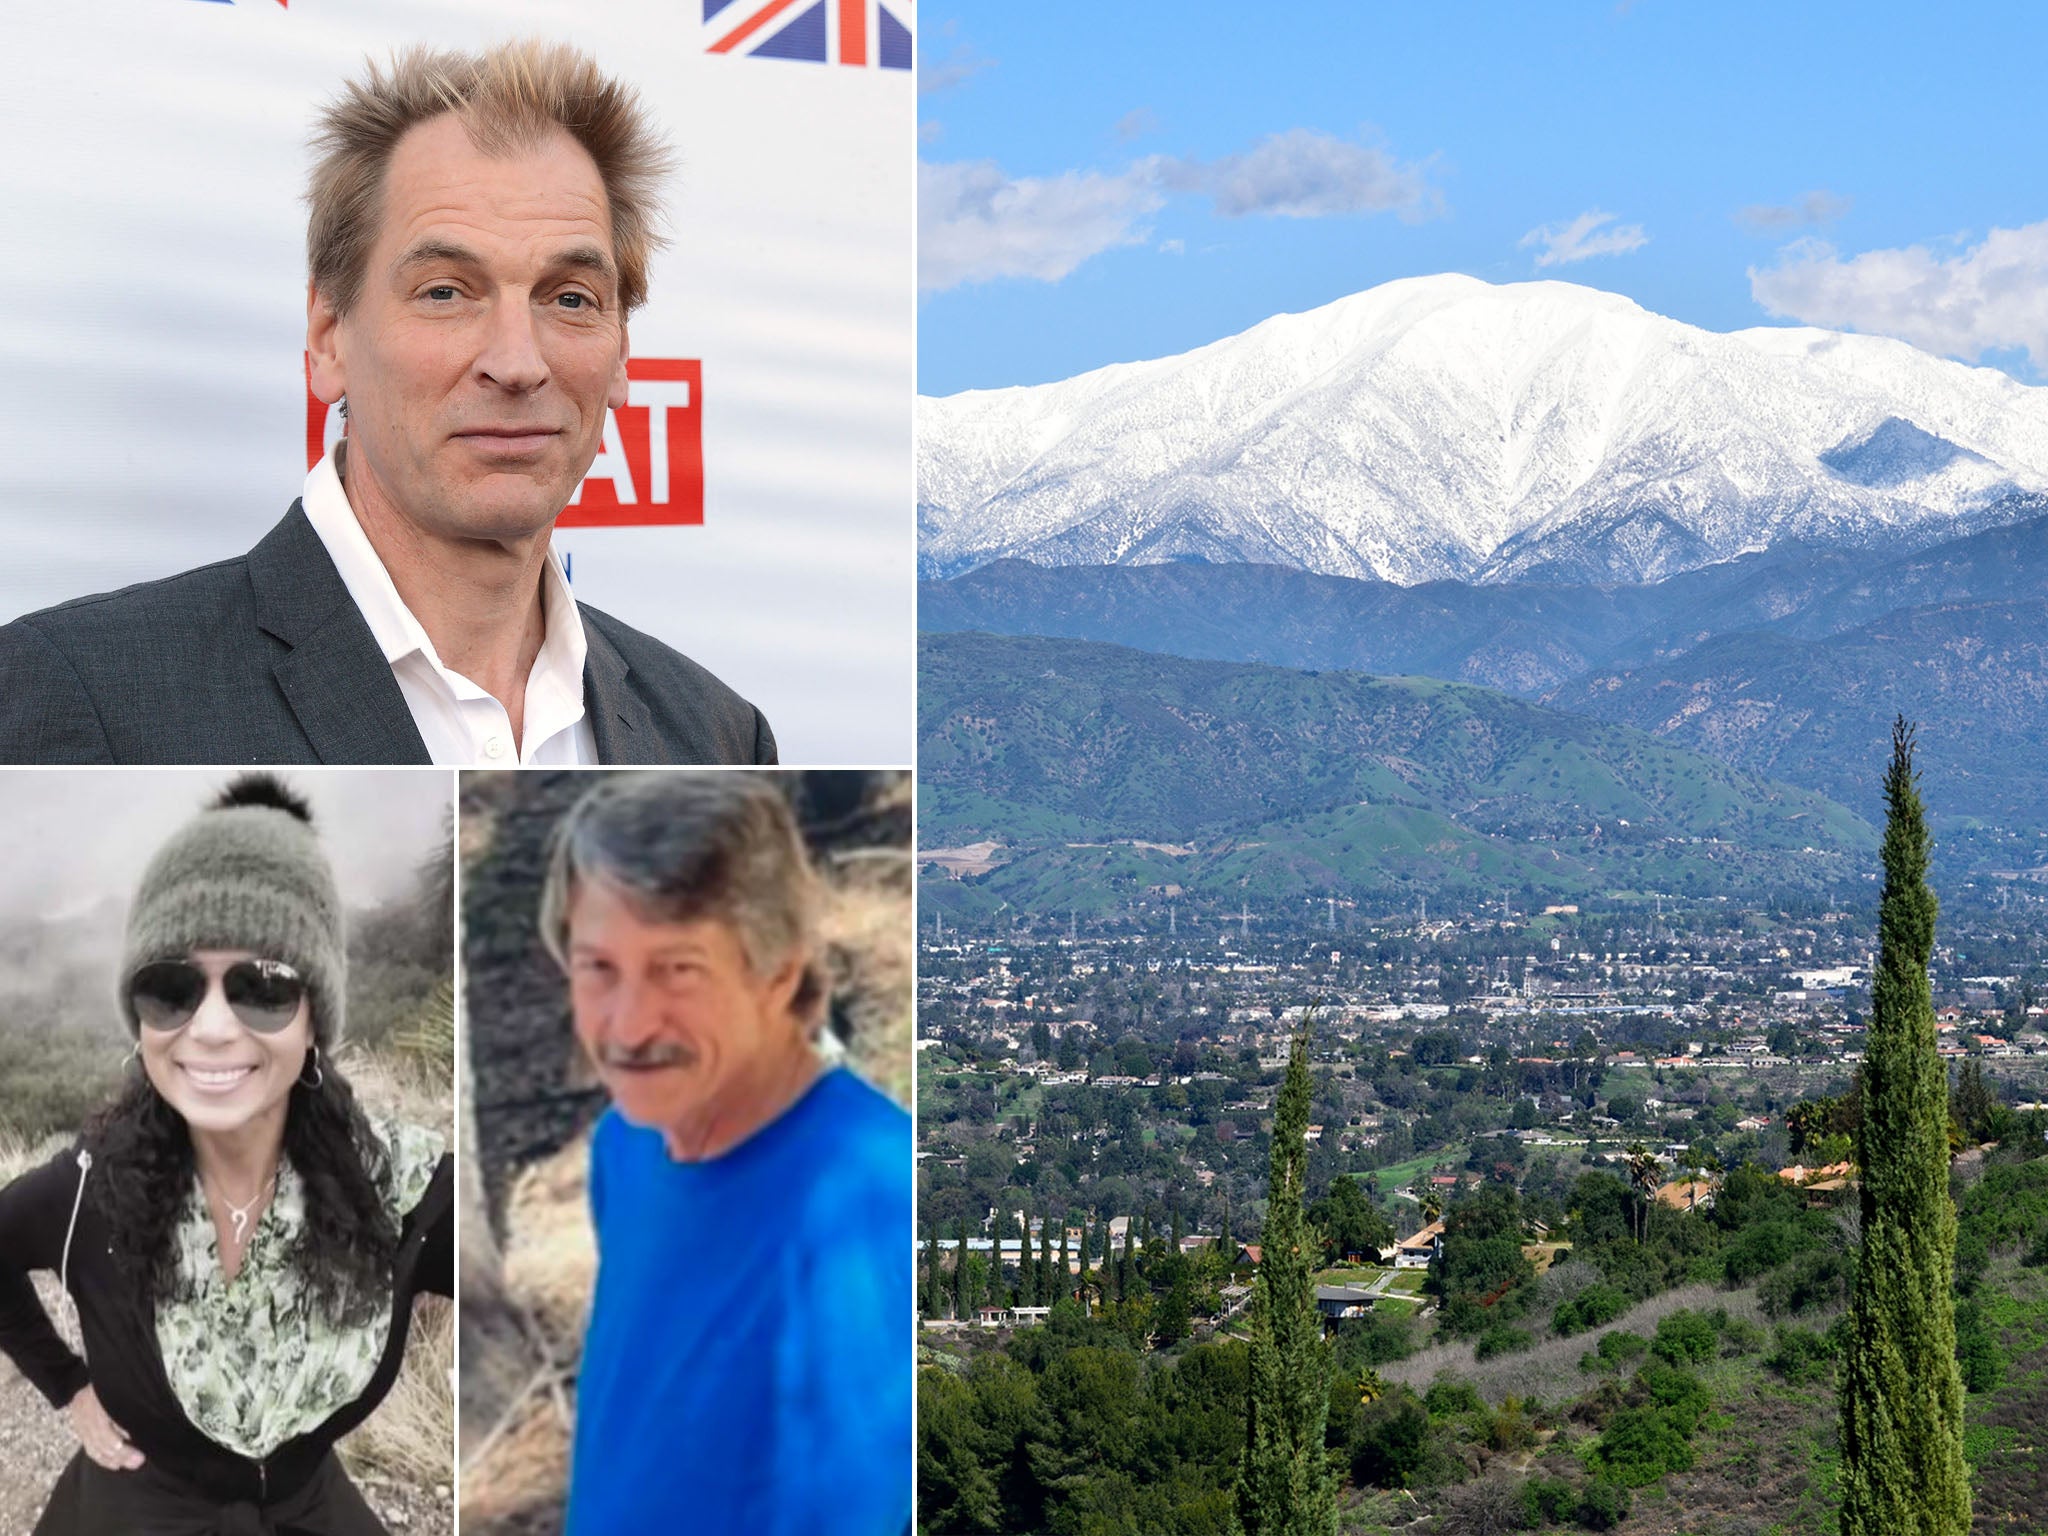 From top, clockwise: The British actor Julian Sands who has been missing for several days after hiking on Mount Baldy, right. Jeffrey Morton and Crystal Paula Gonzalez recently died while hiking during California’s severe storms